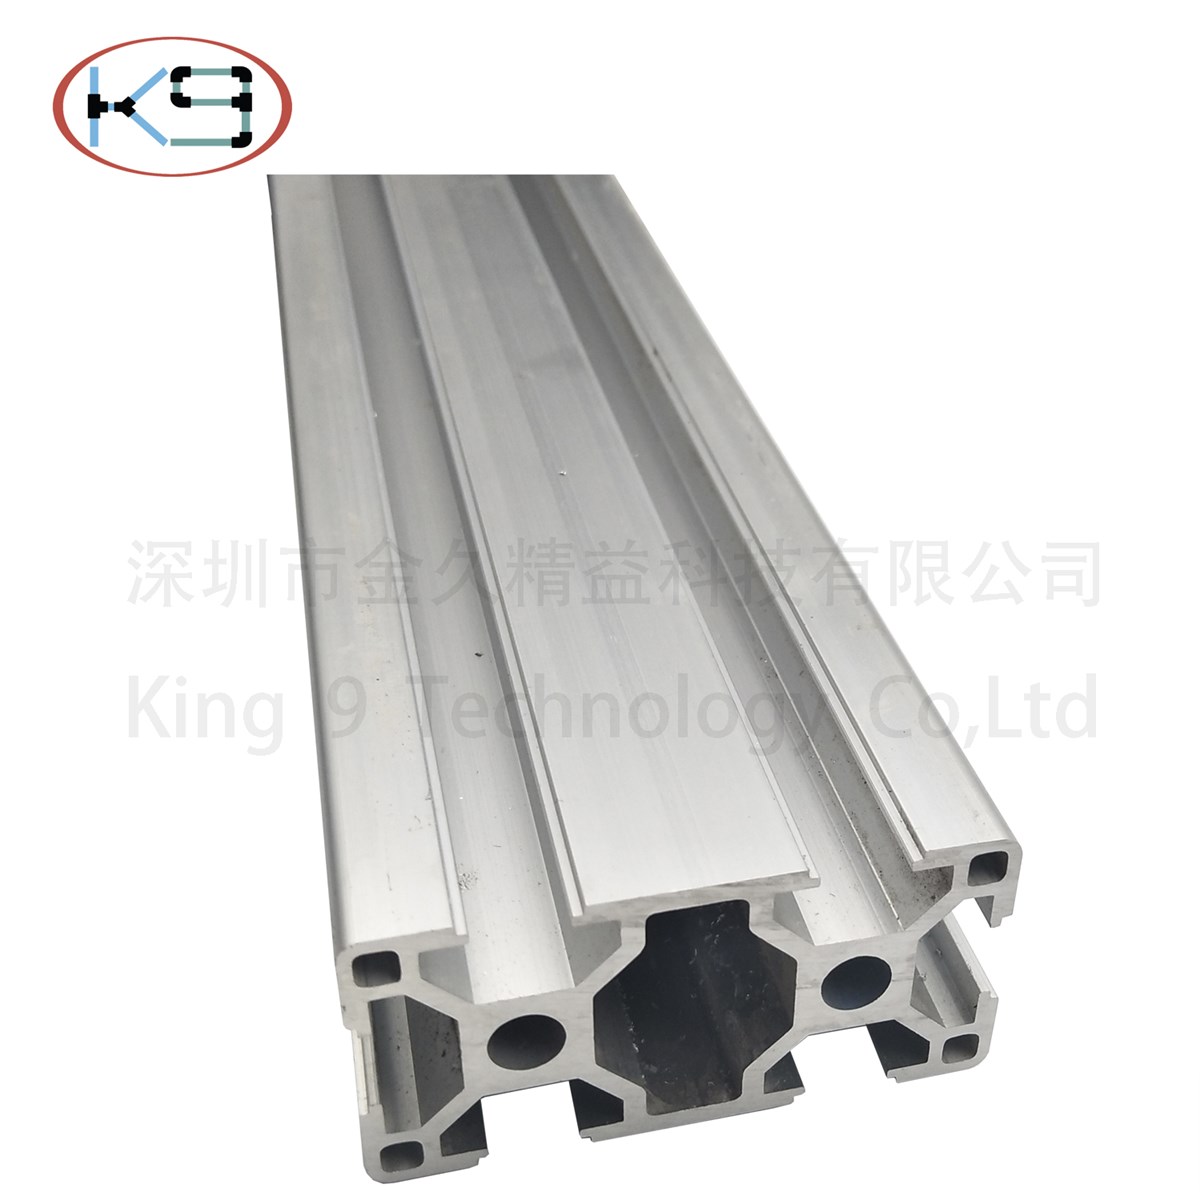 Aluminum profile for industrial products of King 9